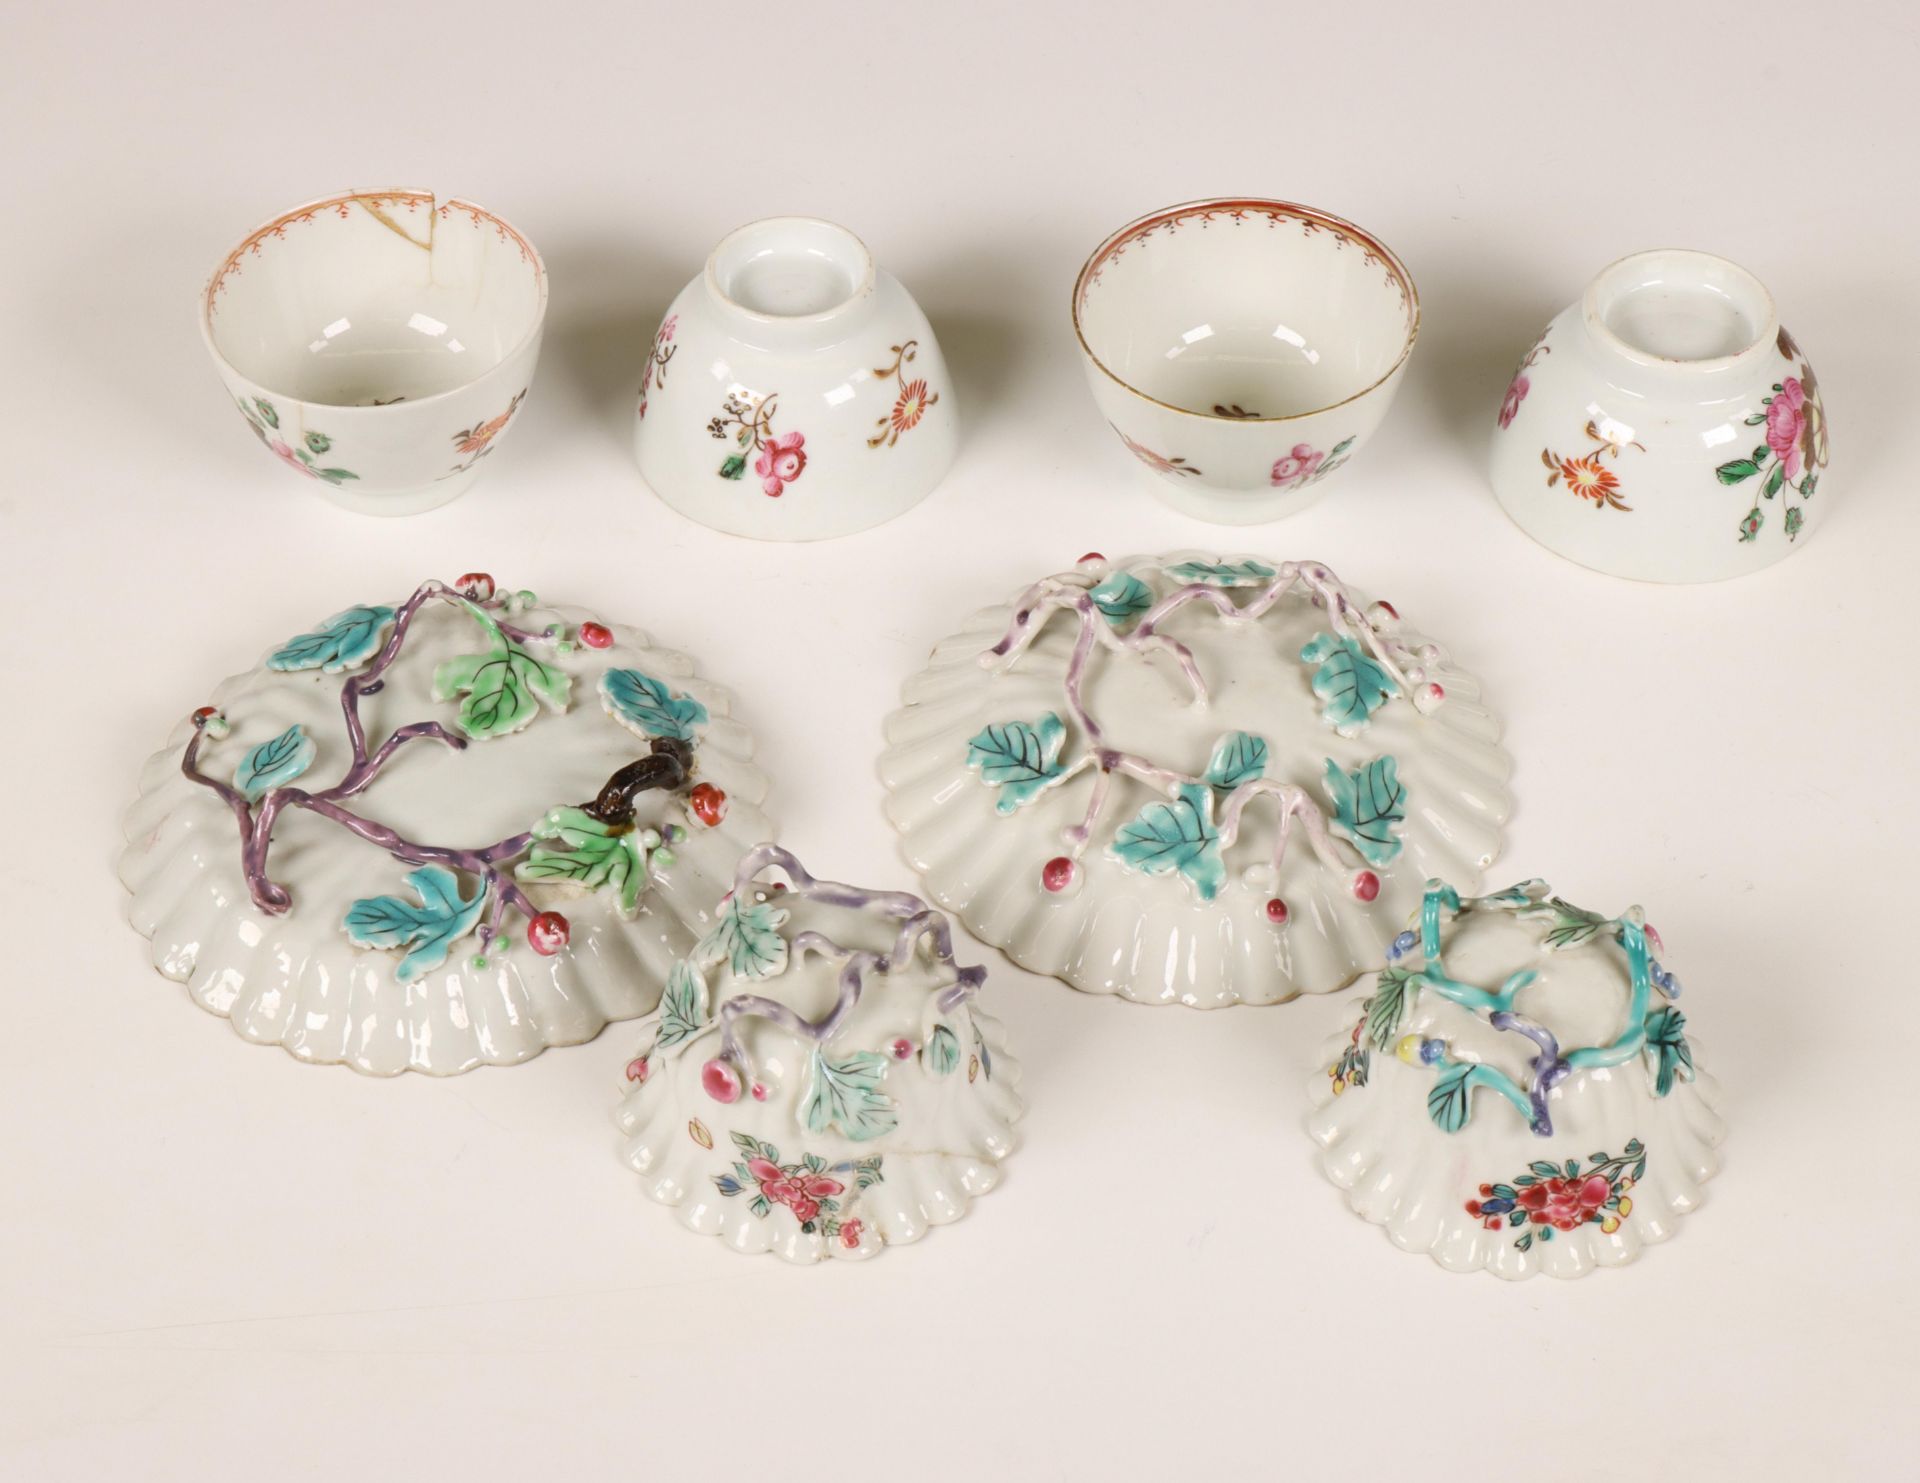 China, collection of famille rose porcelain cups and saucers, late Qing dynasty (1644-1912), - Image 2 of 2